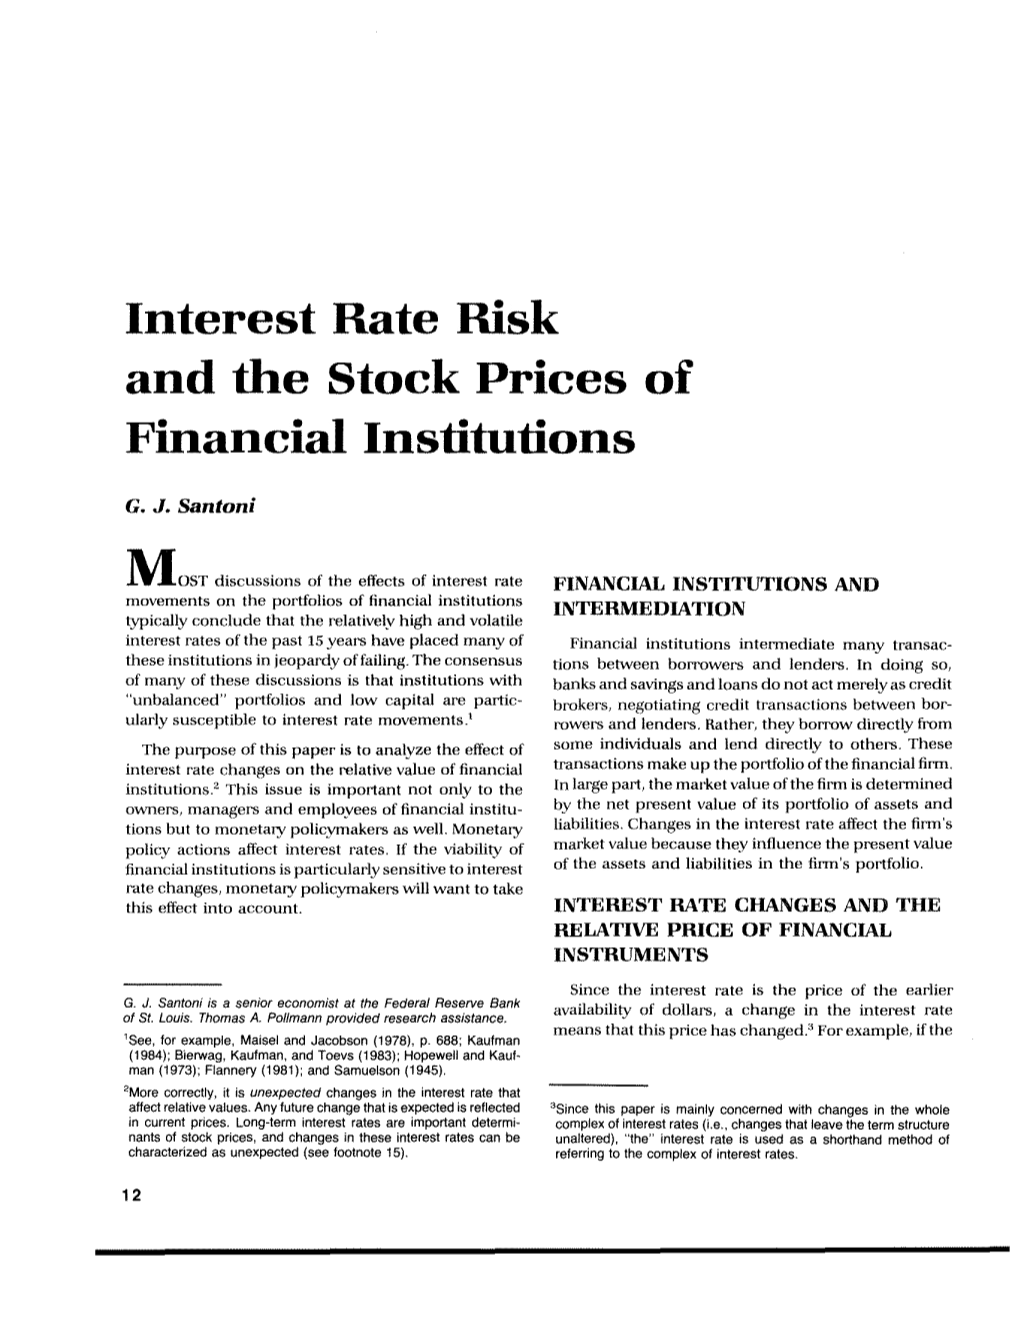 Interest Rate Risk and the Stock Prices of Financial Institutions